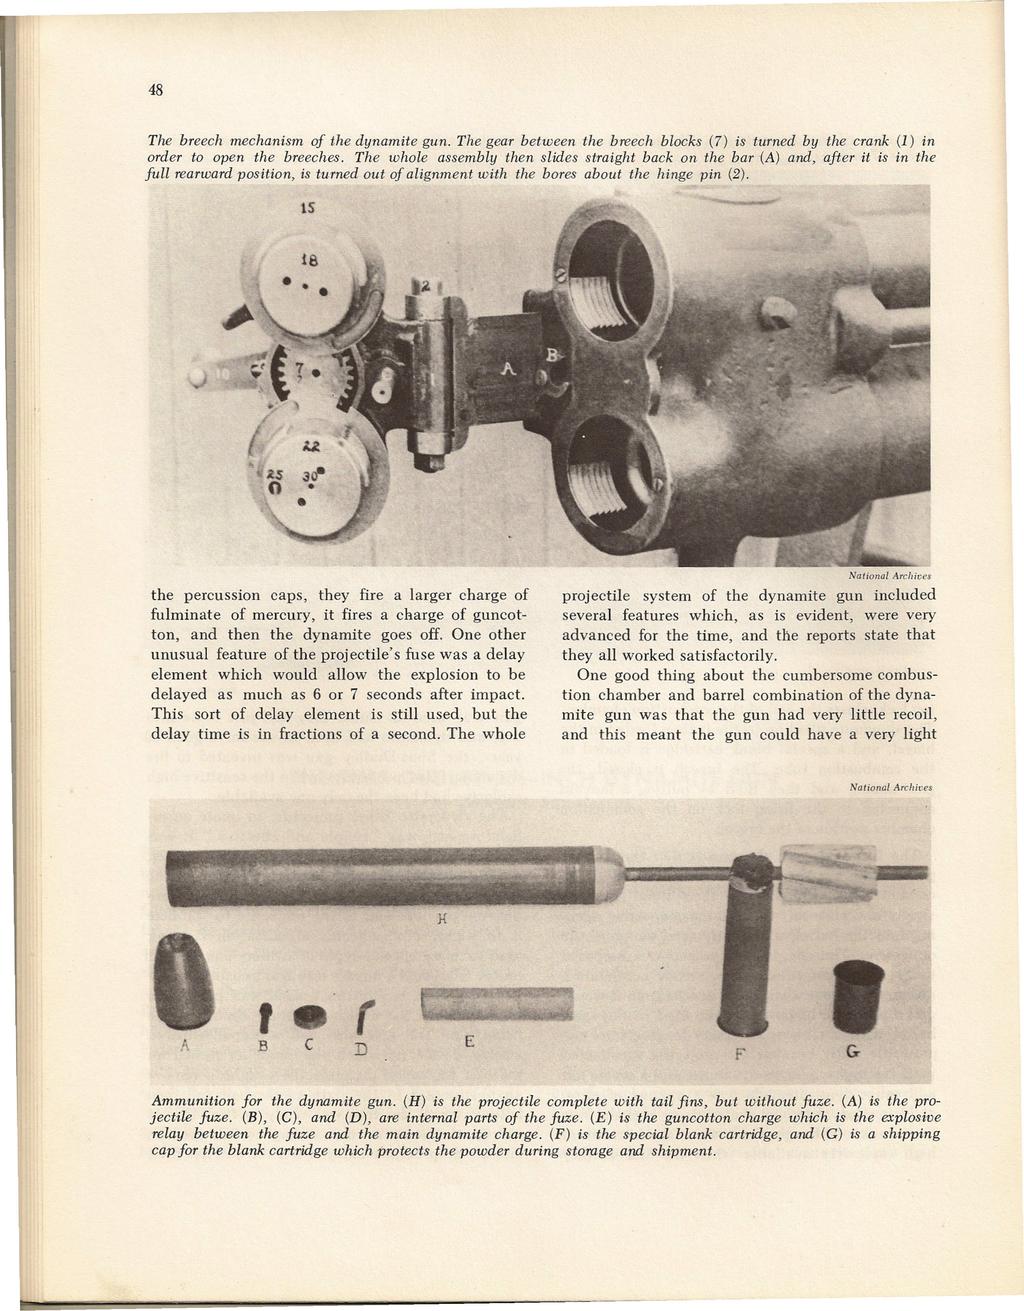 48 The breech mechanism of the dynamite gun. The gear between the breech blocks (7) is turned by the crank (1) in order to open the breeches.